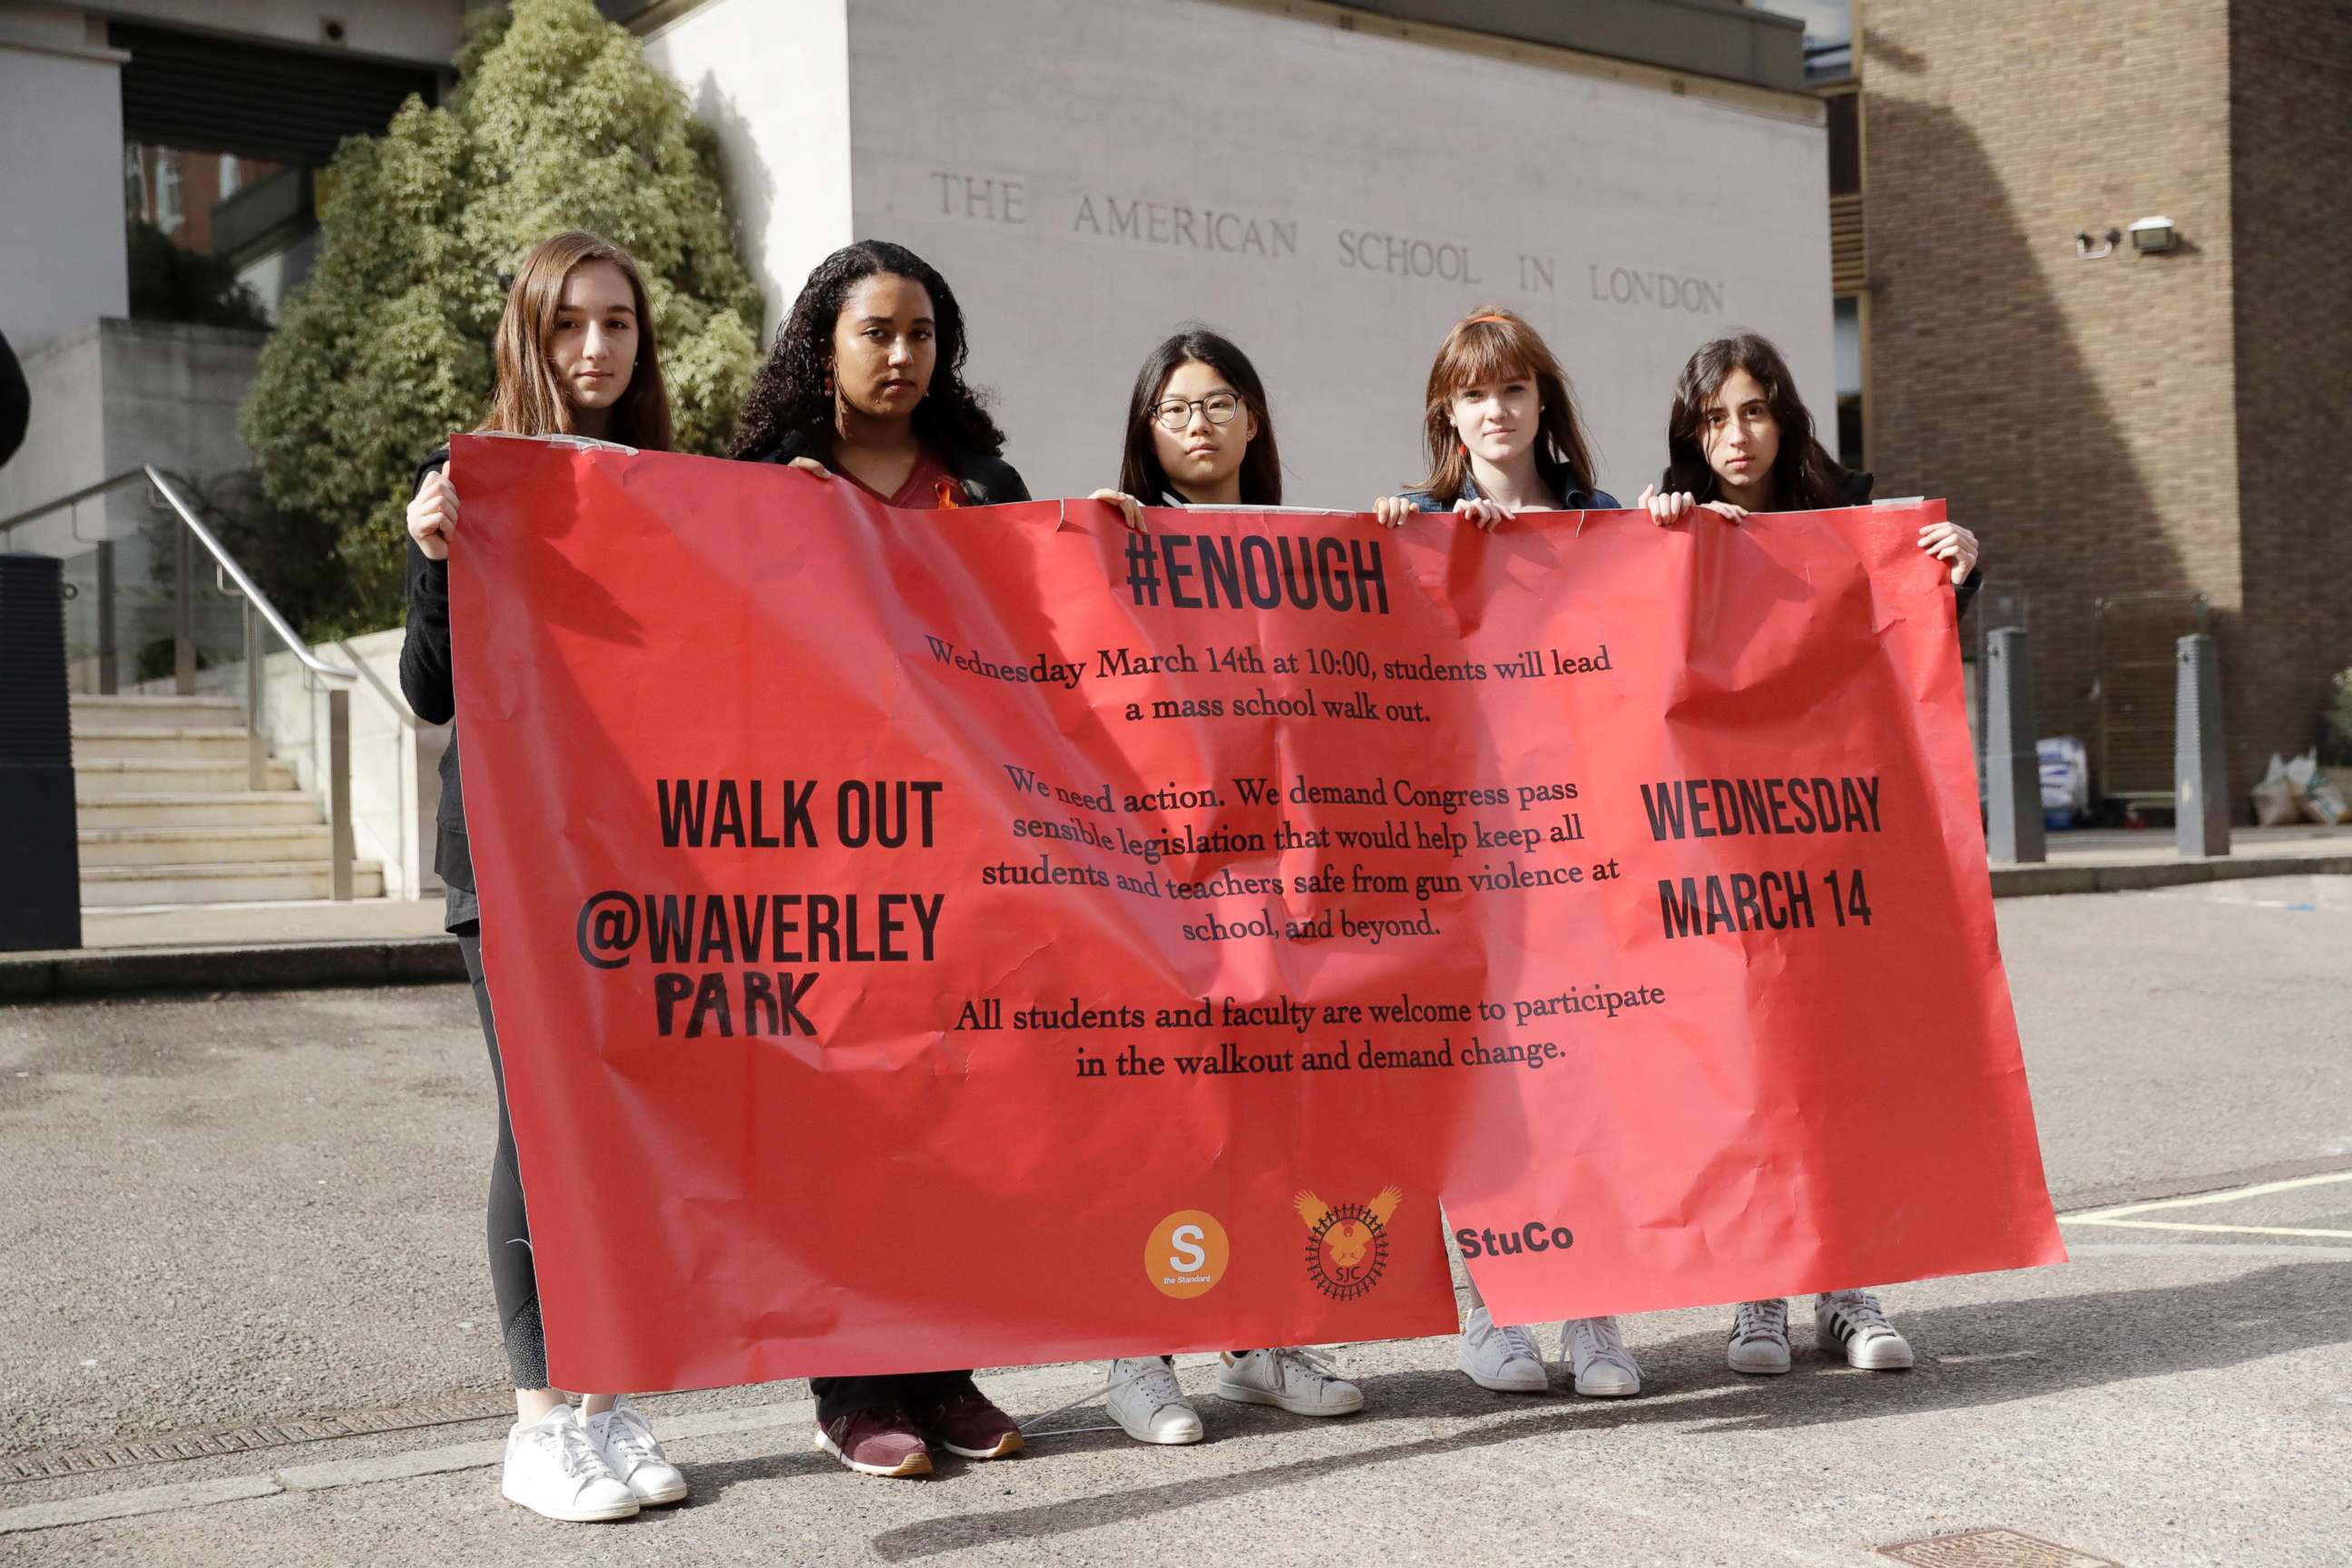 PHOTO: Students pose for photographs with a banner outside the front of the American School in London, after taking part in a 17-minute walkout in the school playground, which was attended by approximately 300 students aged 14-18, March 14, 2018.